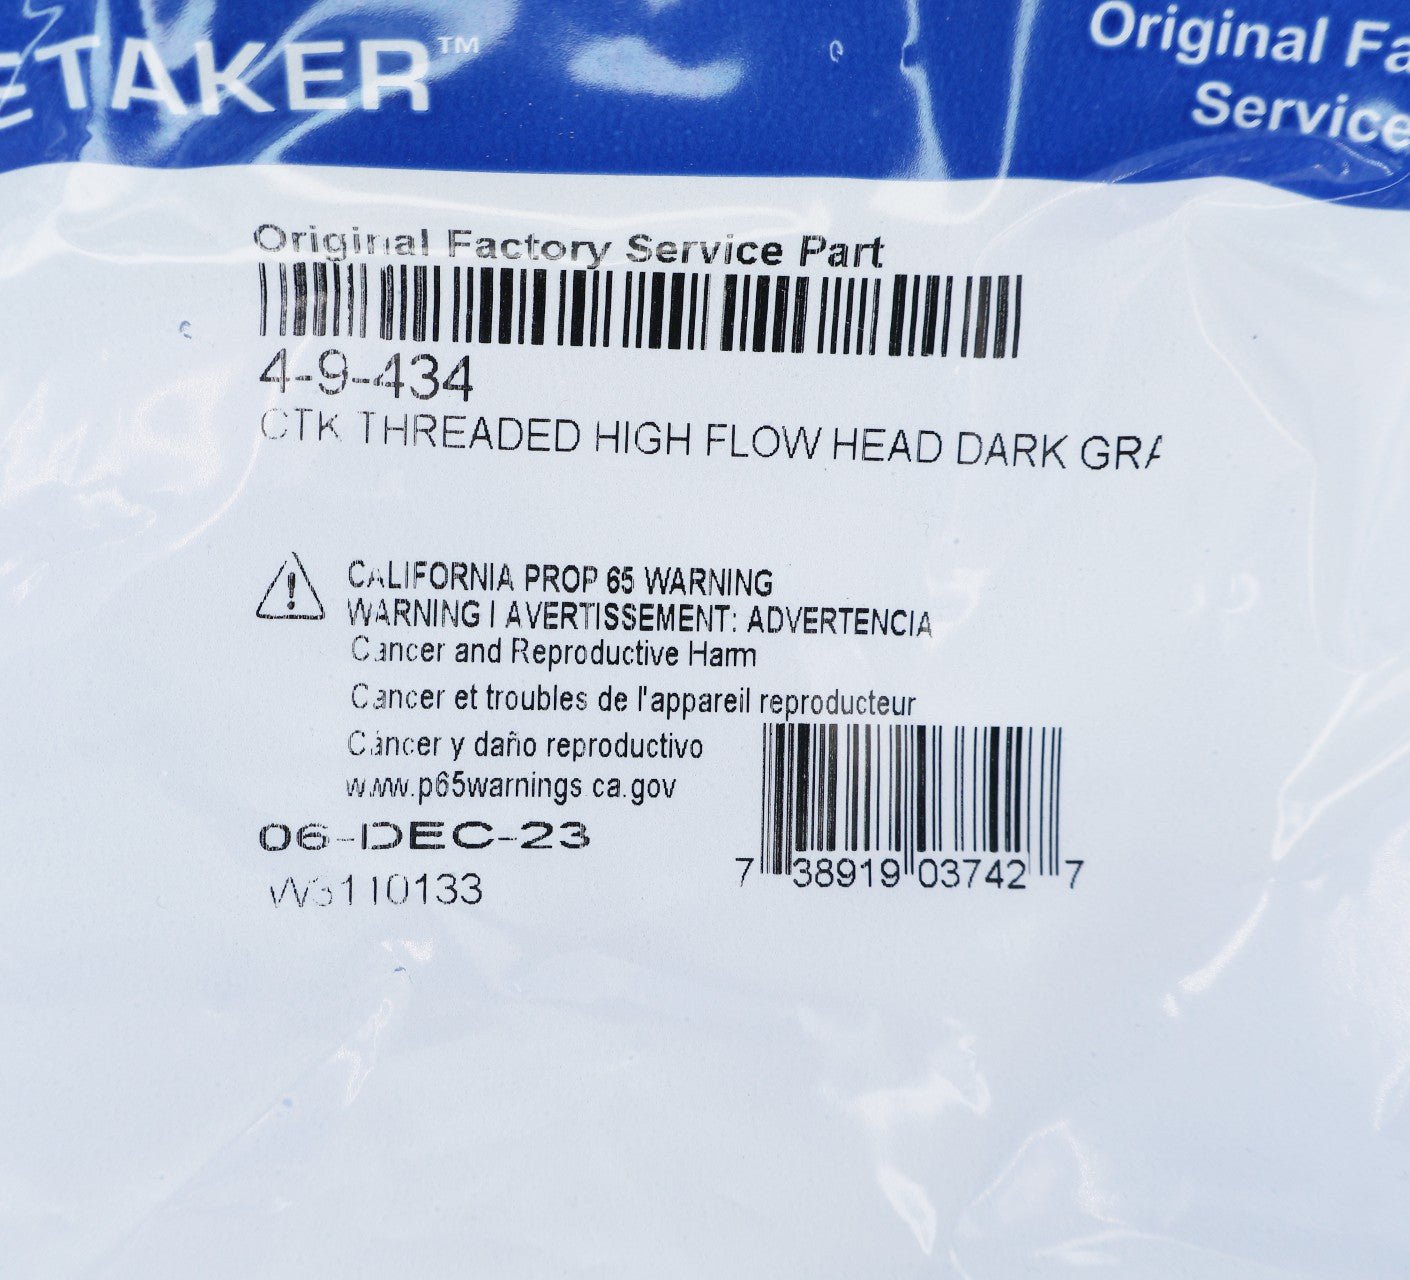 Caretaker 99 (Jandy In-Floor) High Flow Threaded Cleaning Head Charcoal Gray 4-9-434 - Pop-Up Heads - img-6